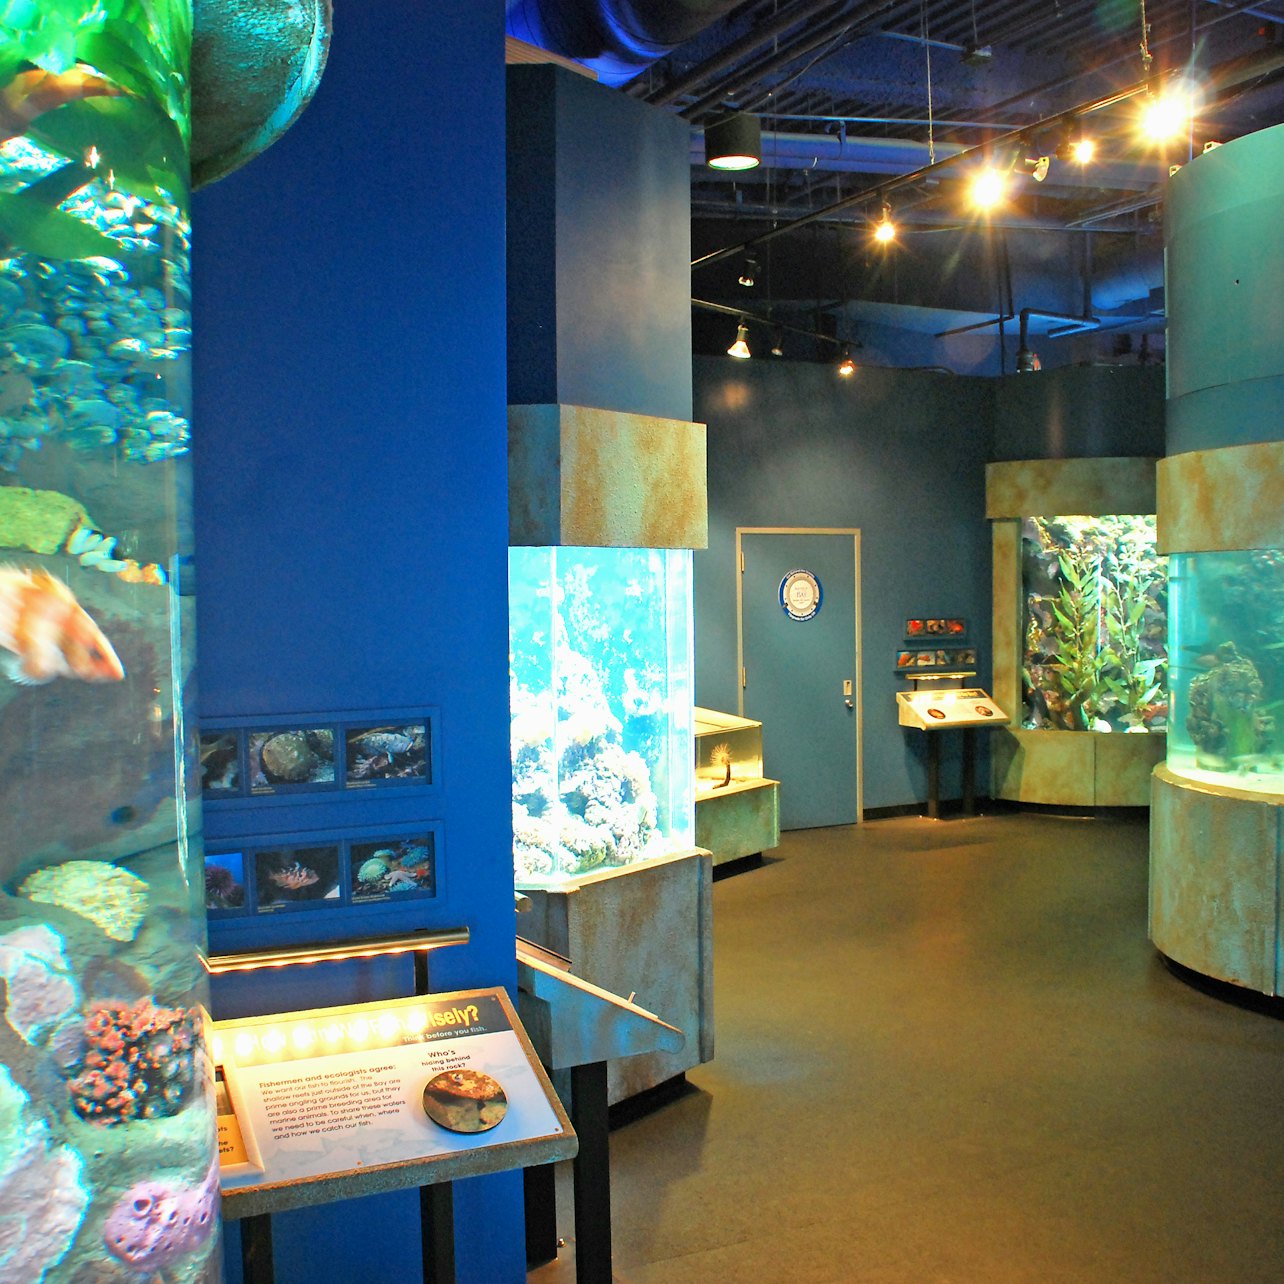 Aquarium of the Bay: Entry Ticket - Accommodations in San Francisco